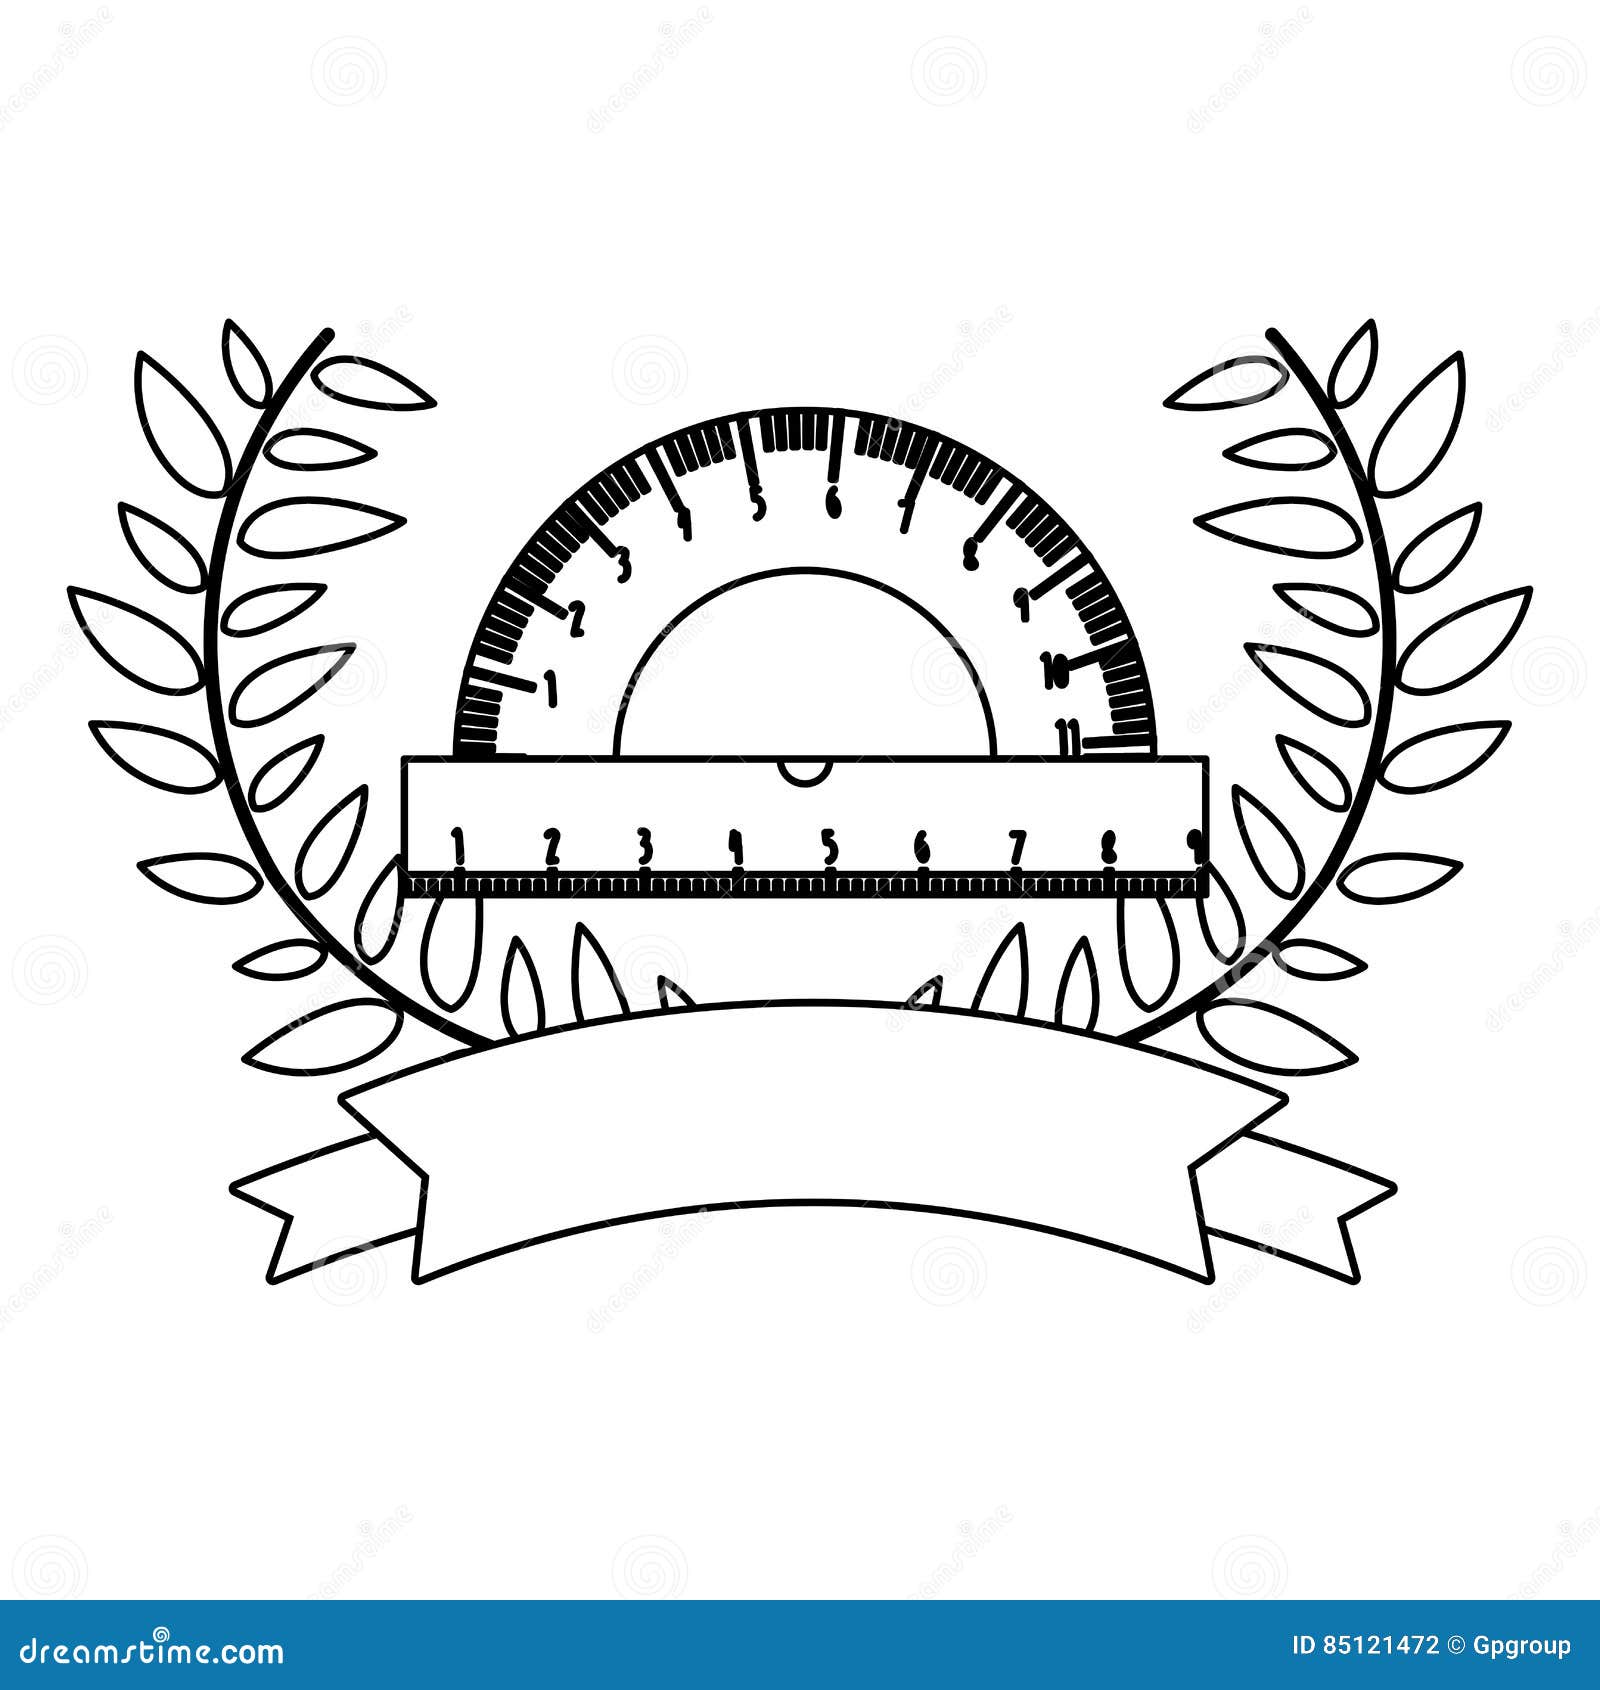 transporter ruler for drawing icon vector illustration Stock Vector